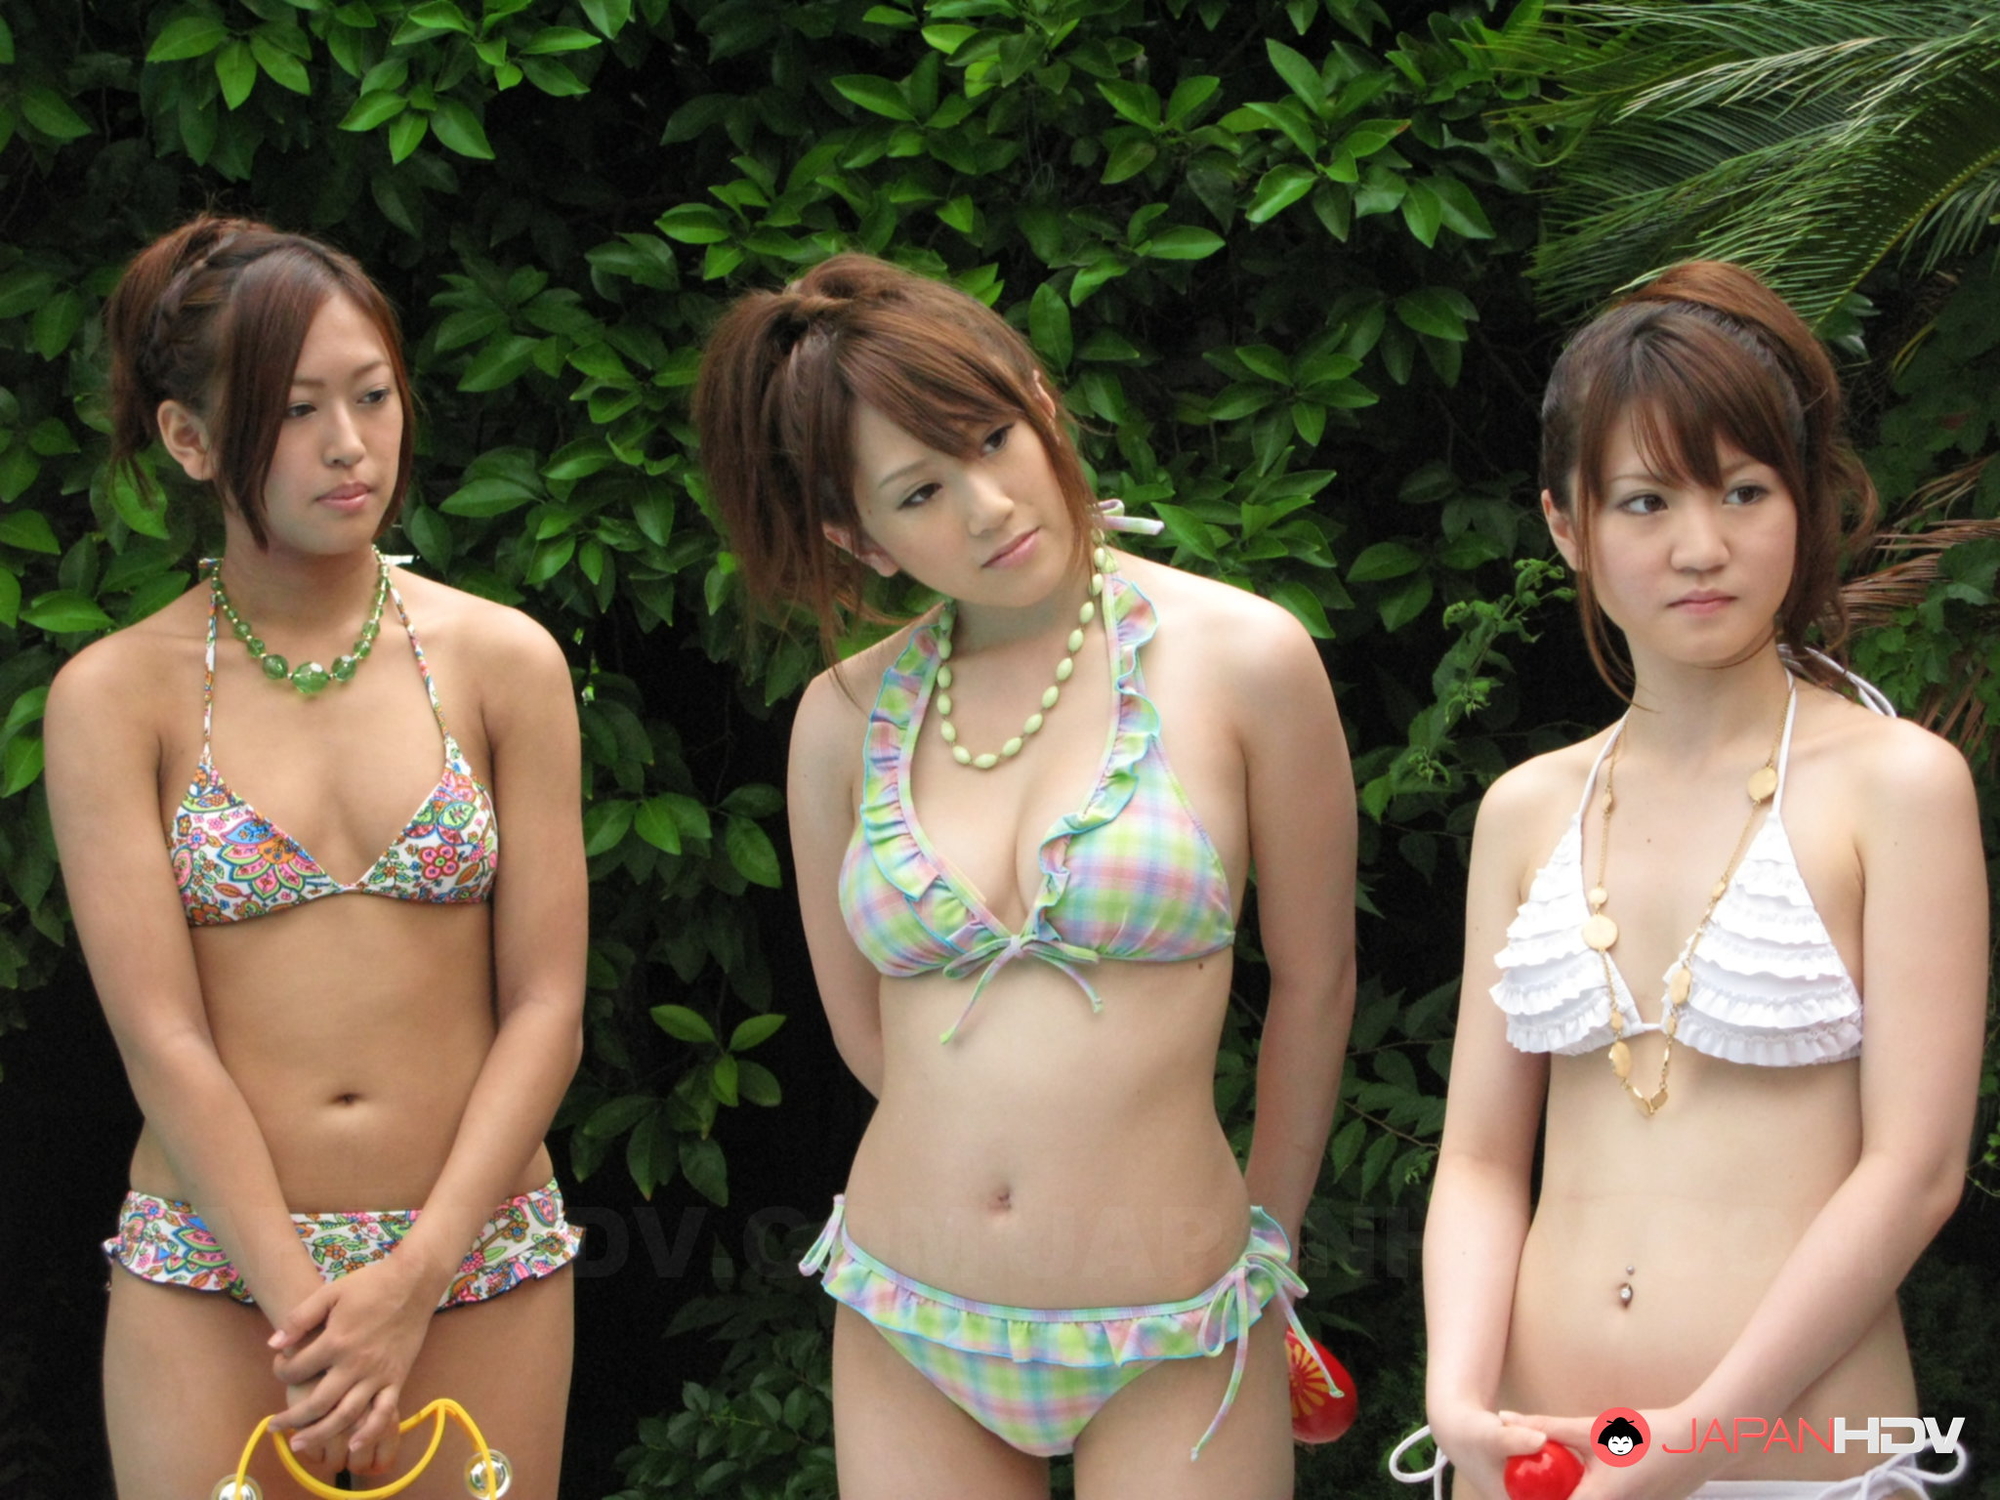 Sexy Girls Pool Party - Really sexy Japanese pool party